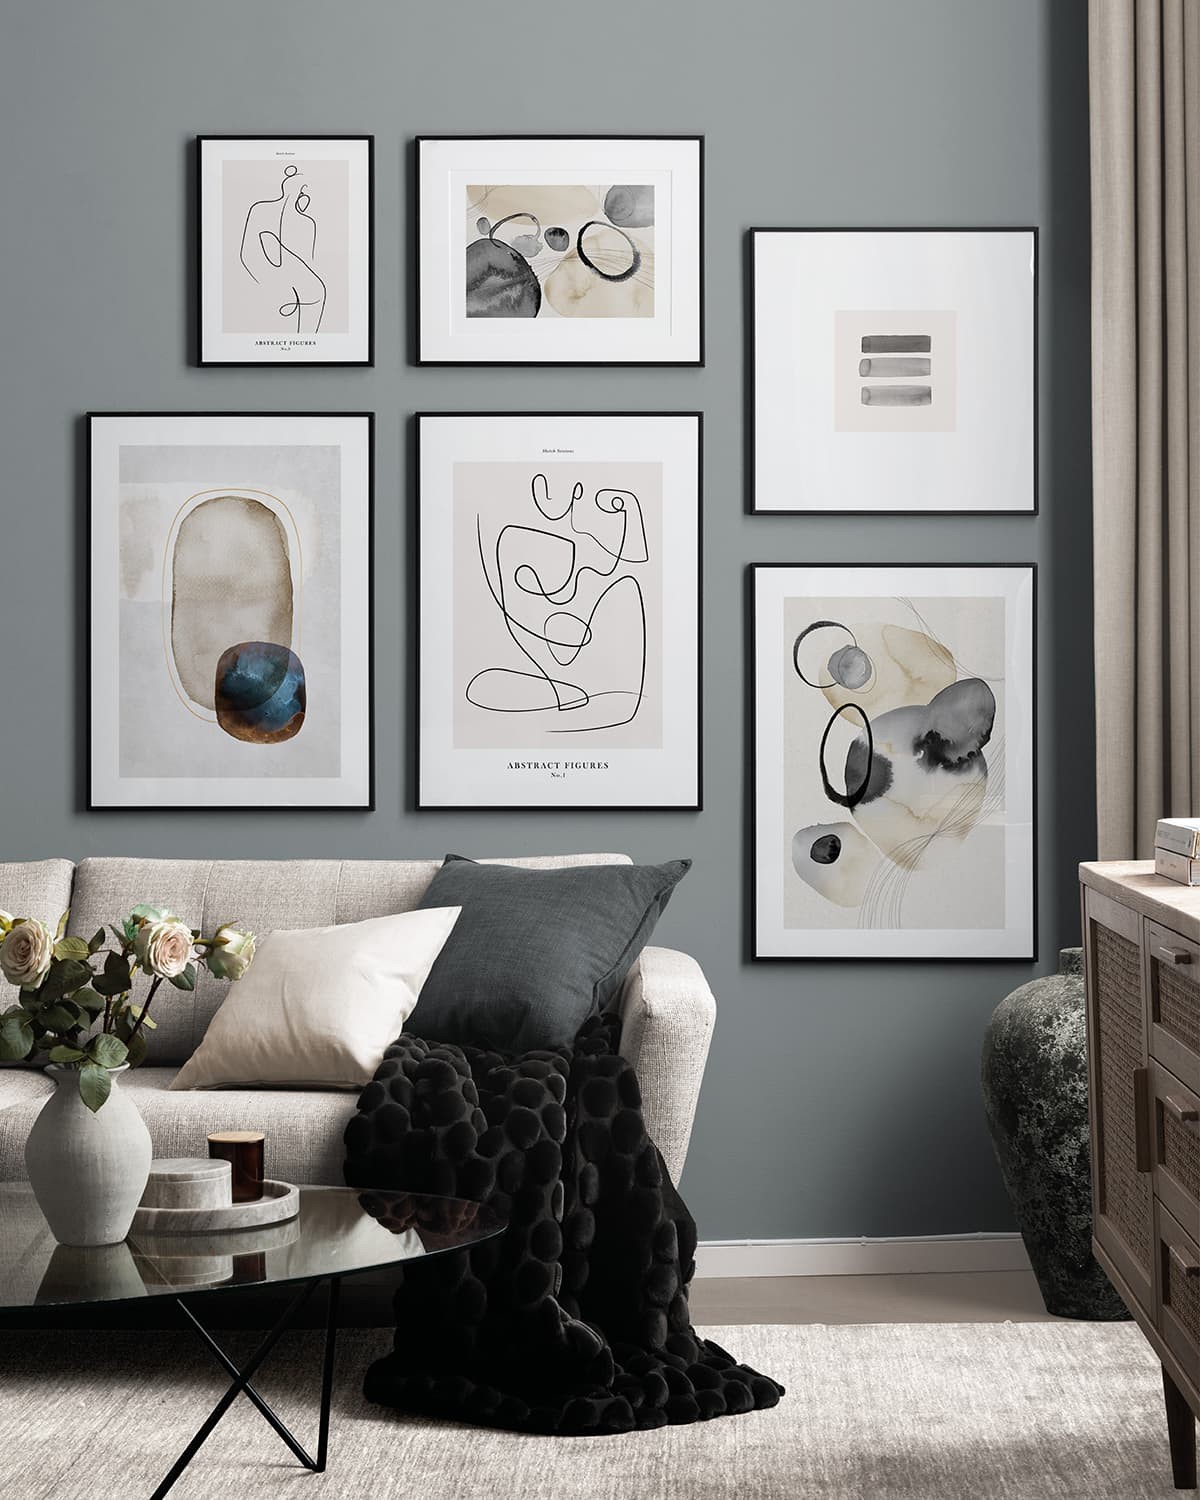 black white and grey gallery wall artworks in living room desenio prints framed on wall